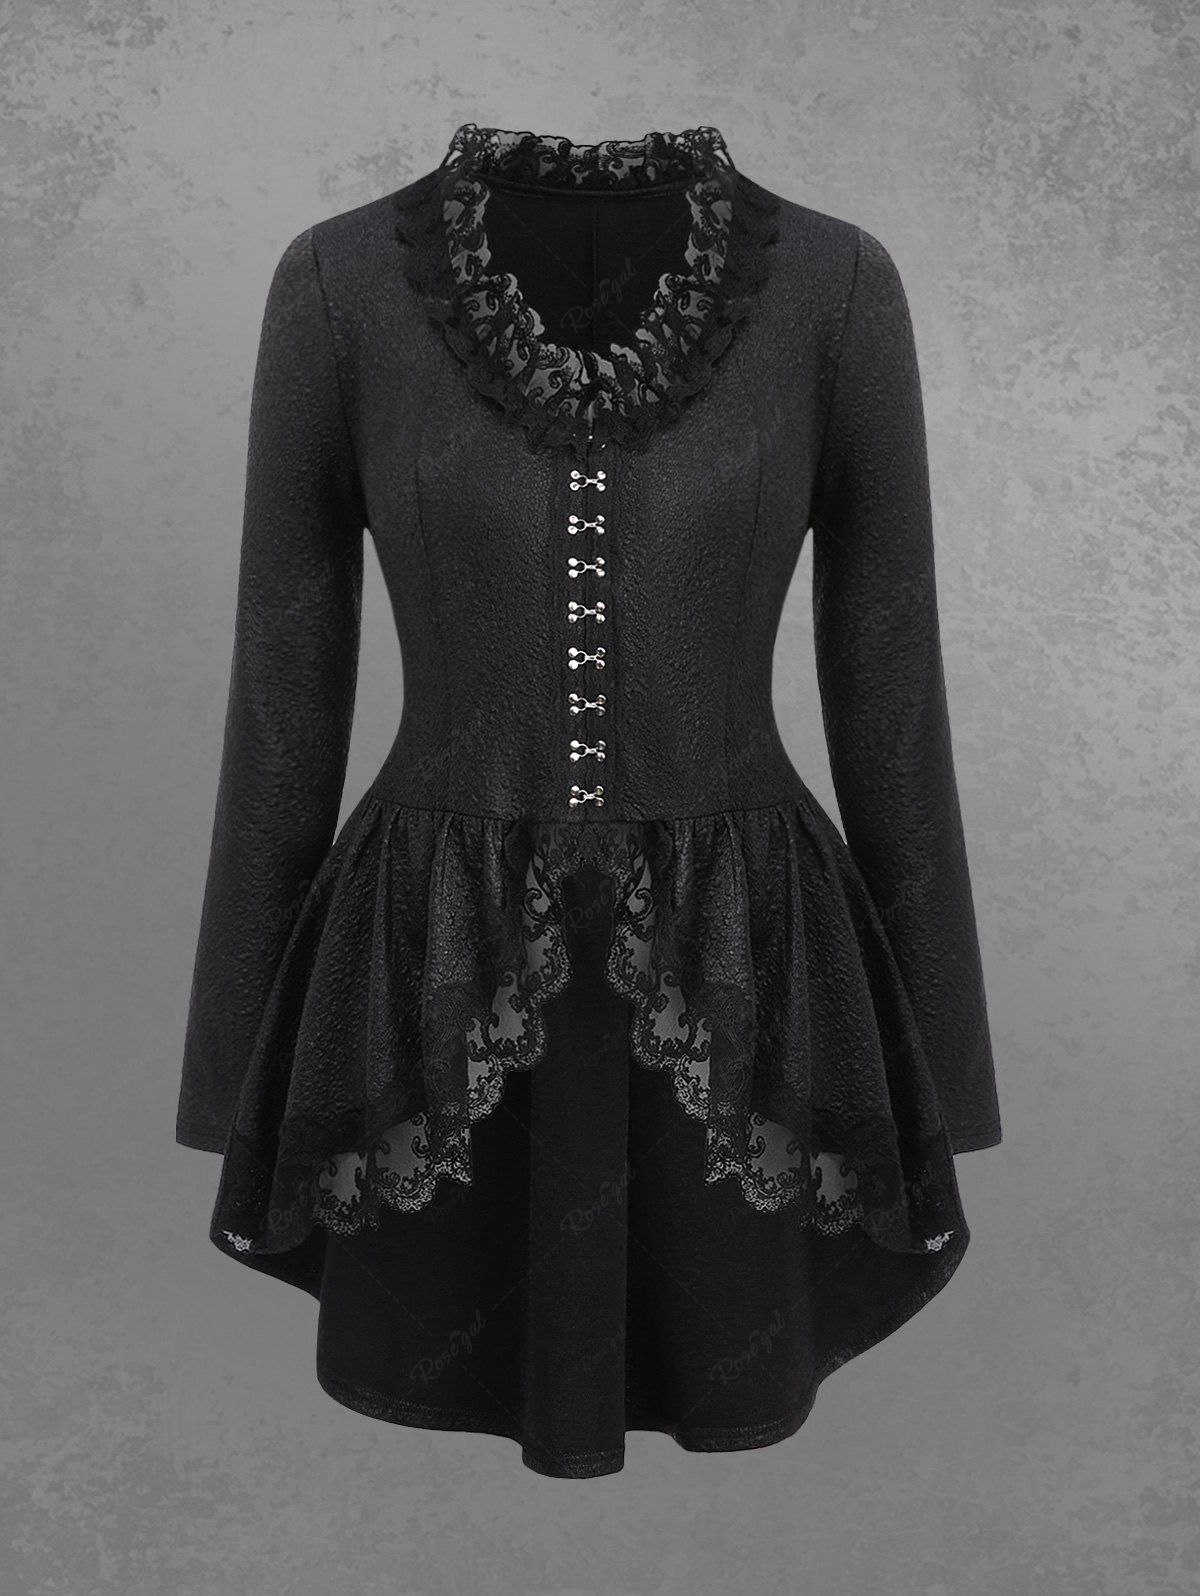 💗Lauren Loves💗 Gothic Crack Textured Floral Lace Trim Hook and Eye Ruffles Asymmetric High Low Long Sleeves Coat